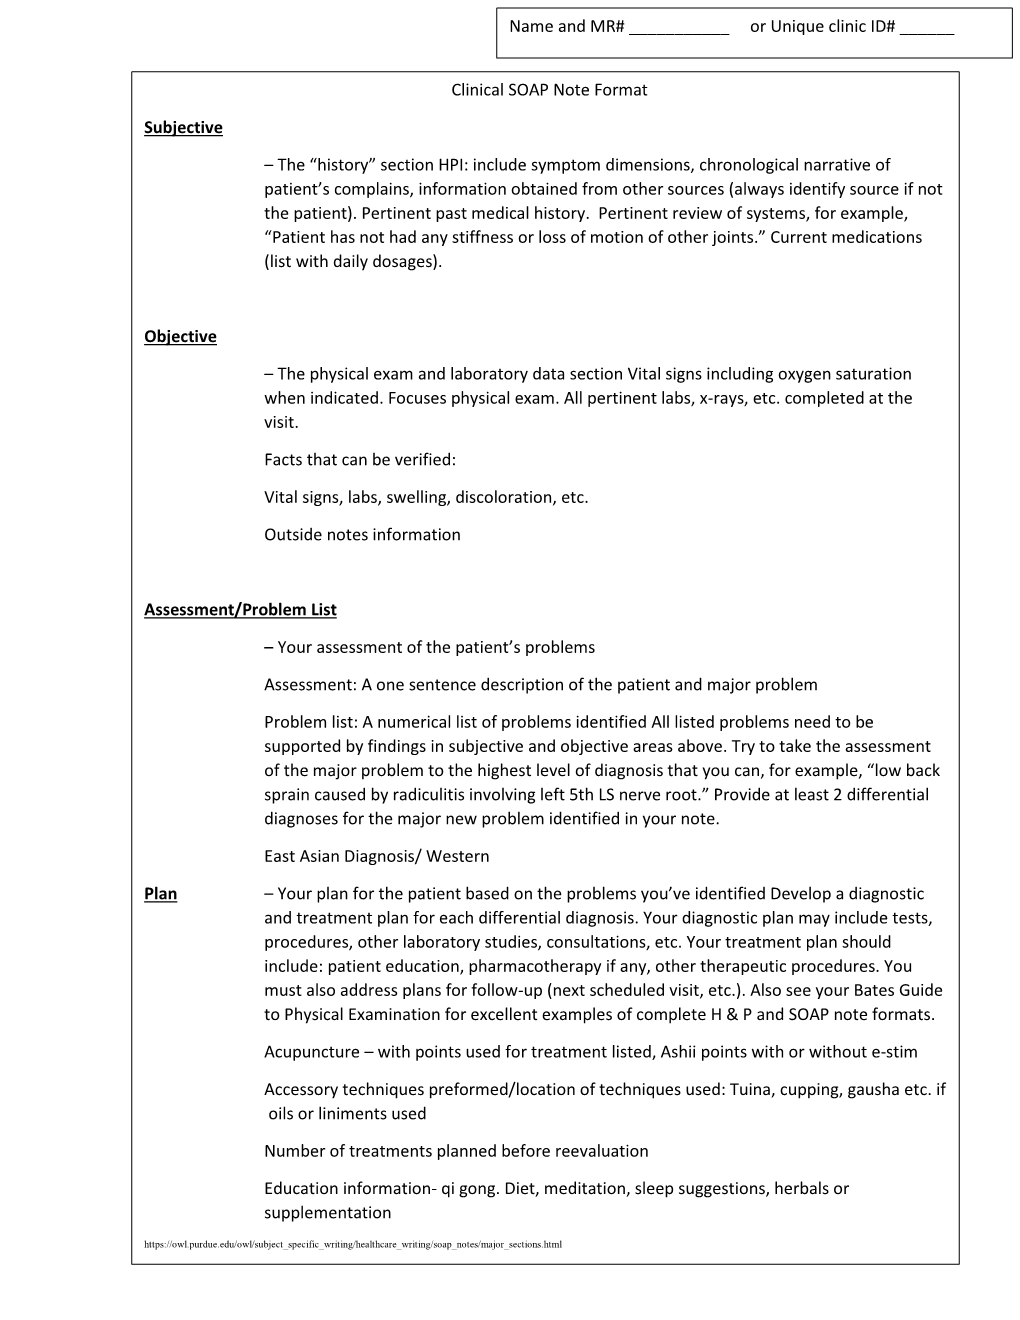 SOAP Note Template